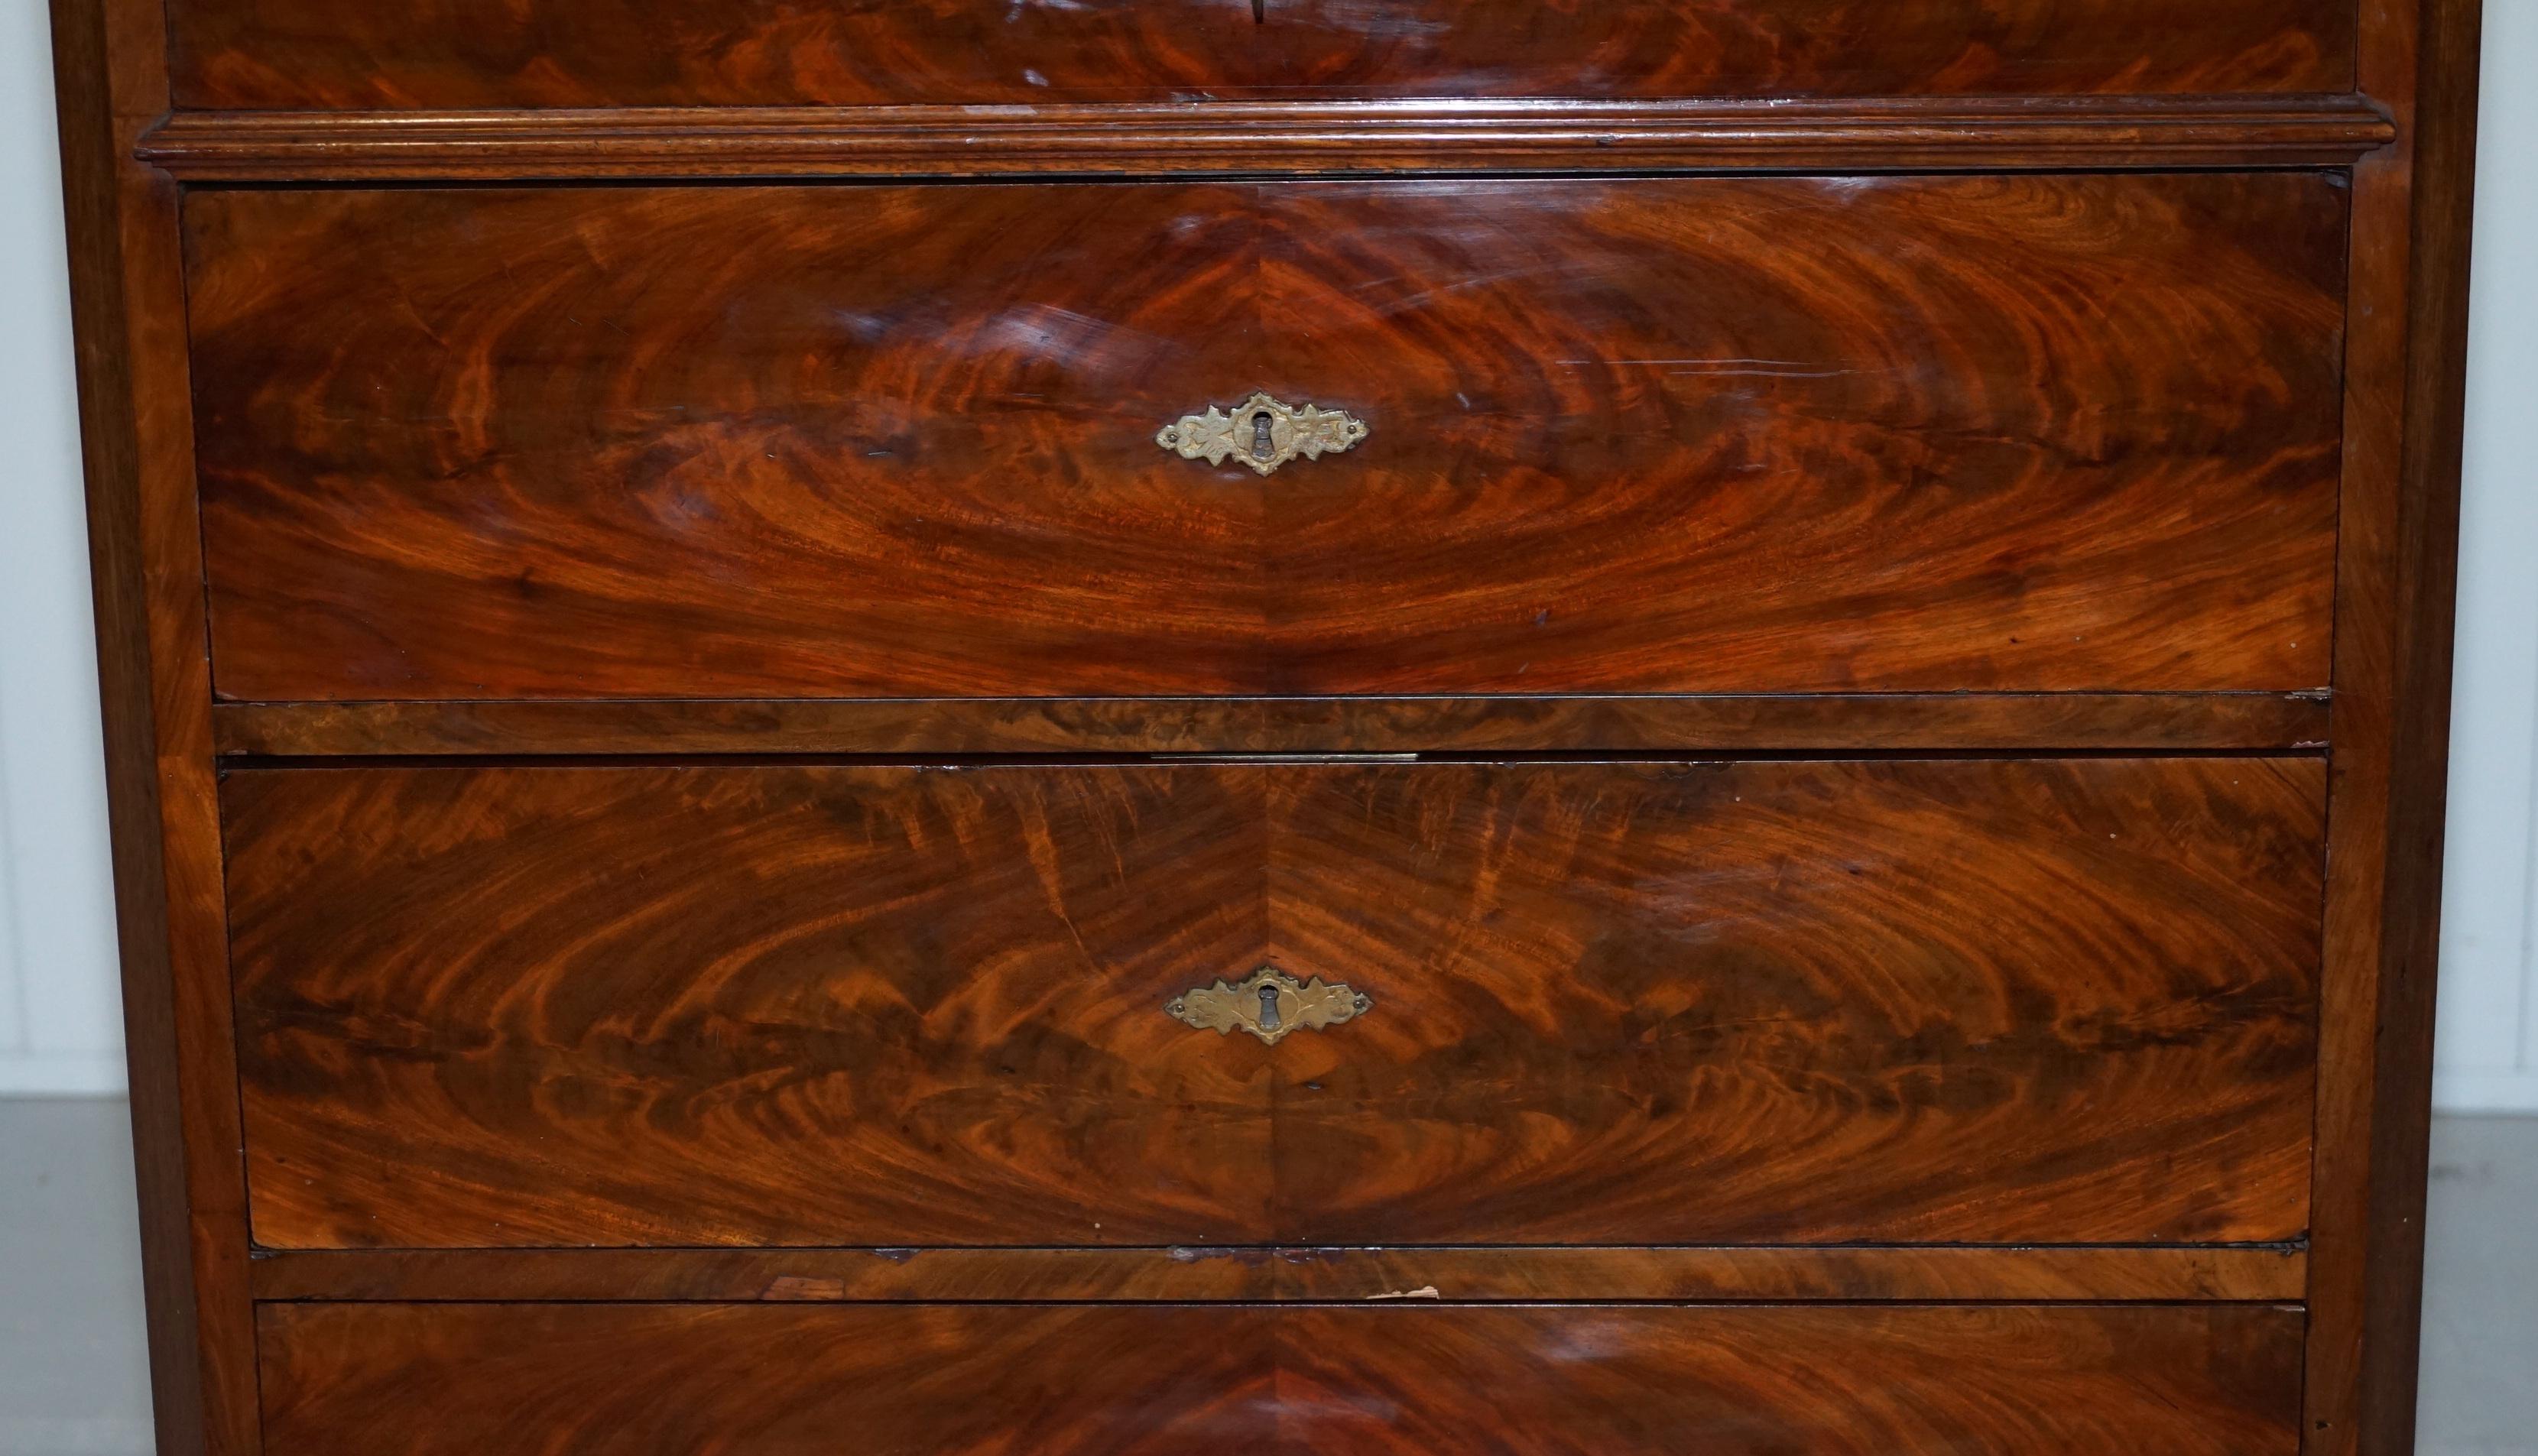 Stunning Biedermeier Flamed Mahogany Small Chest of Drawers Rare Find circa 1820 5